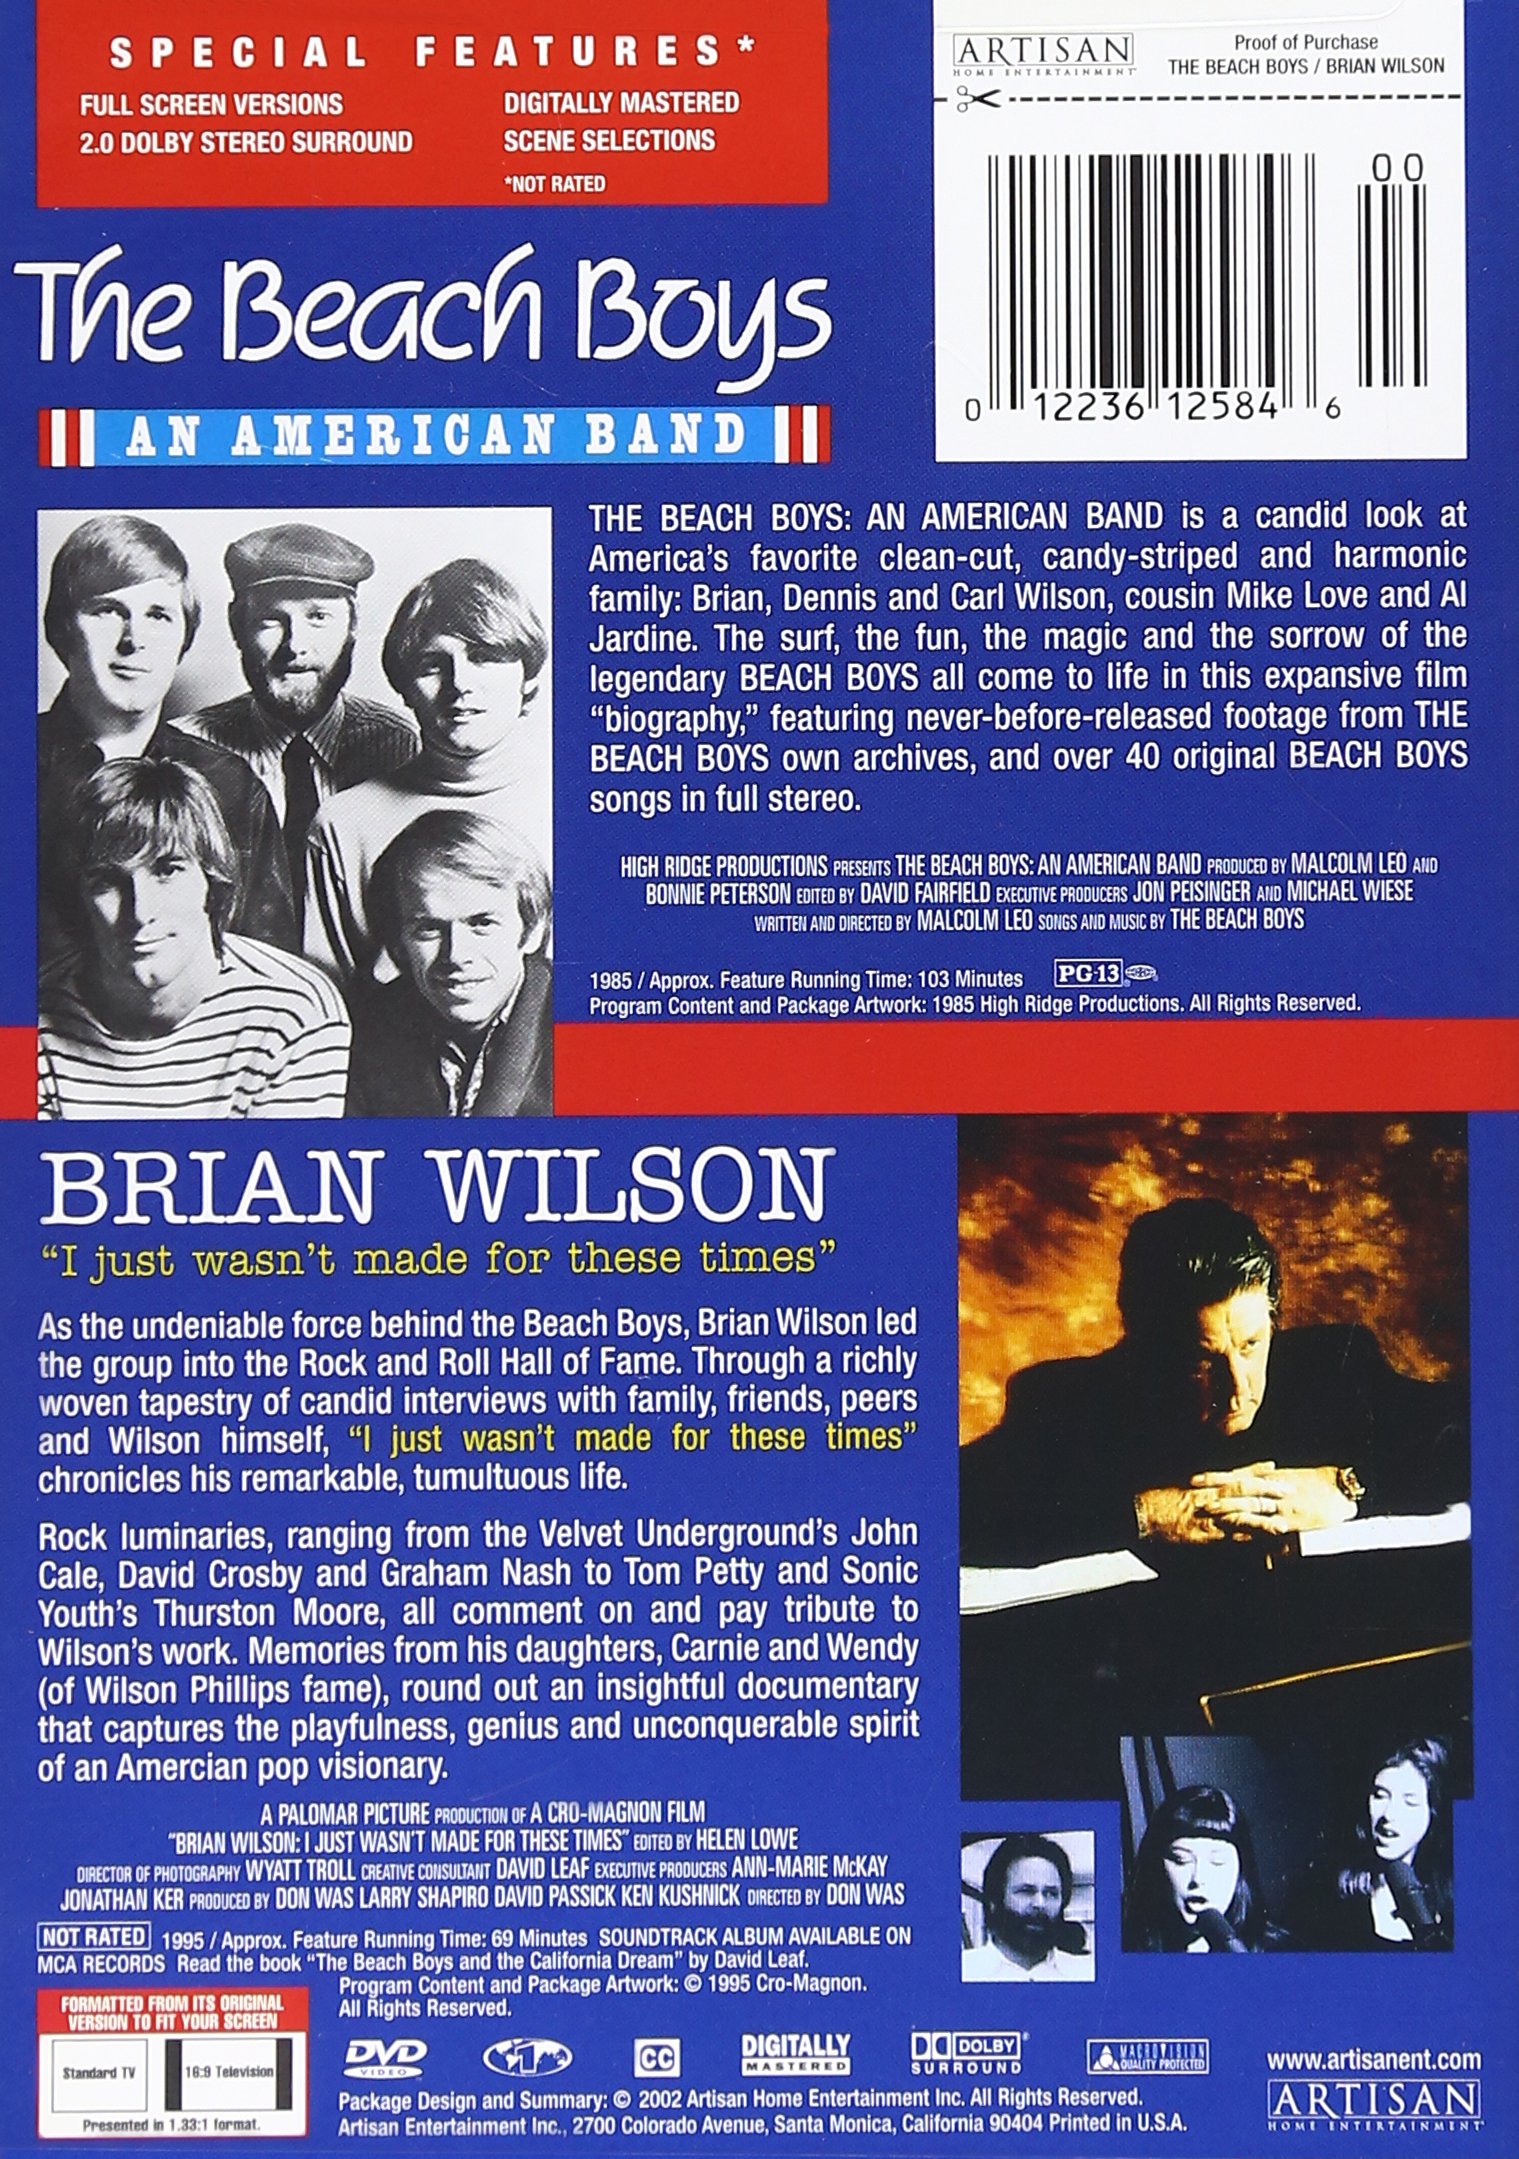 Brian Wilson: I Just Wasn't Made for These Times (1995) Screenshot 3